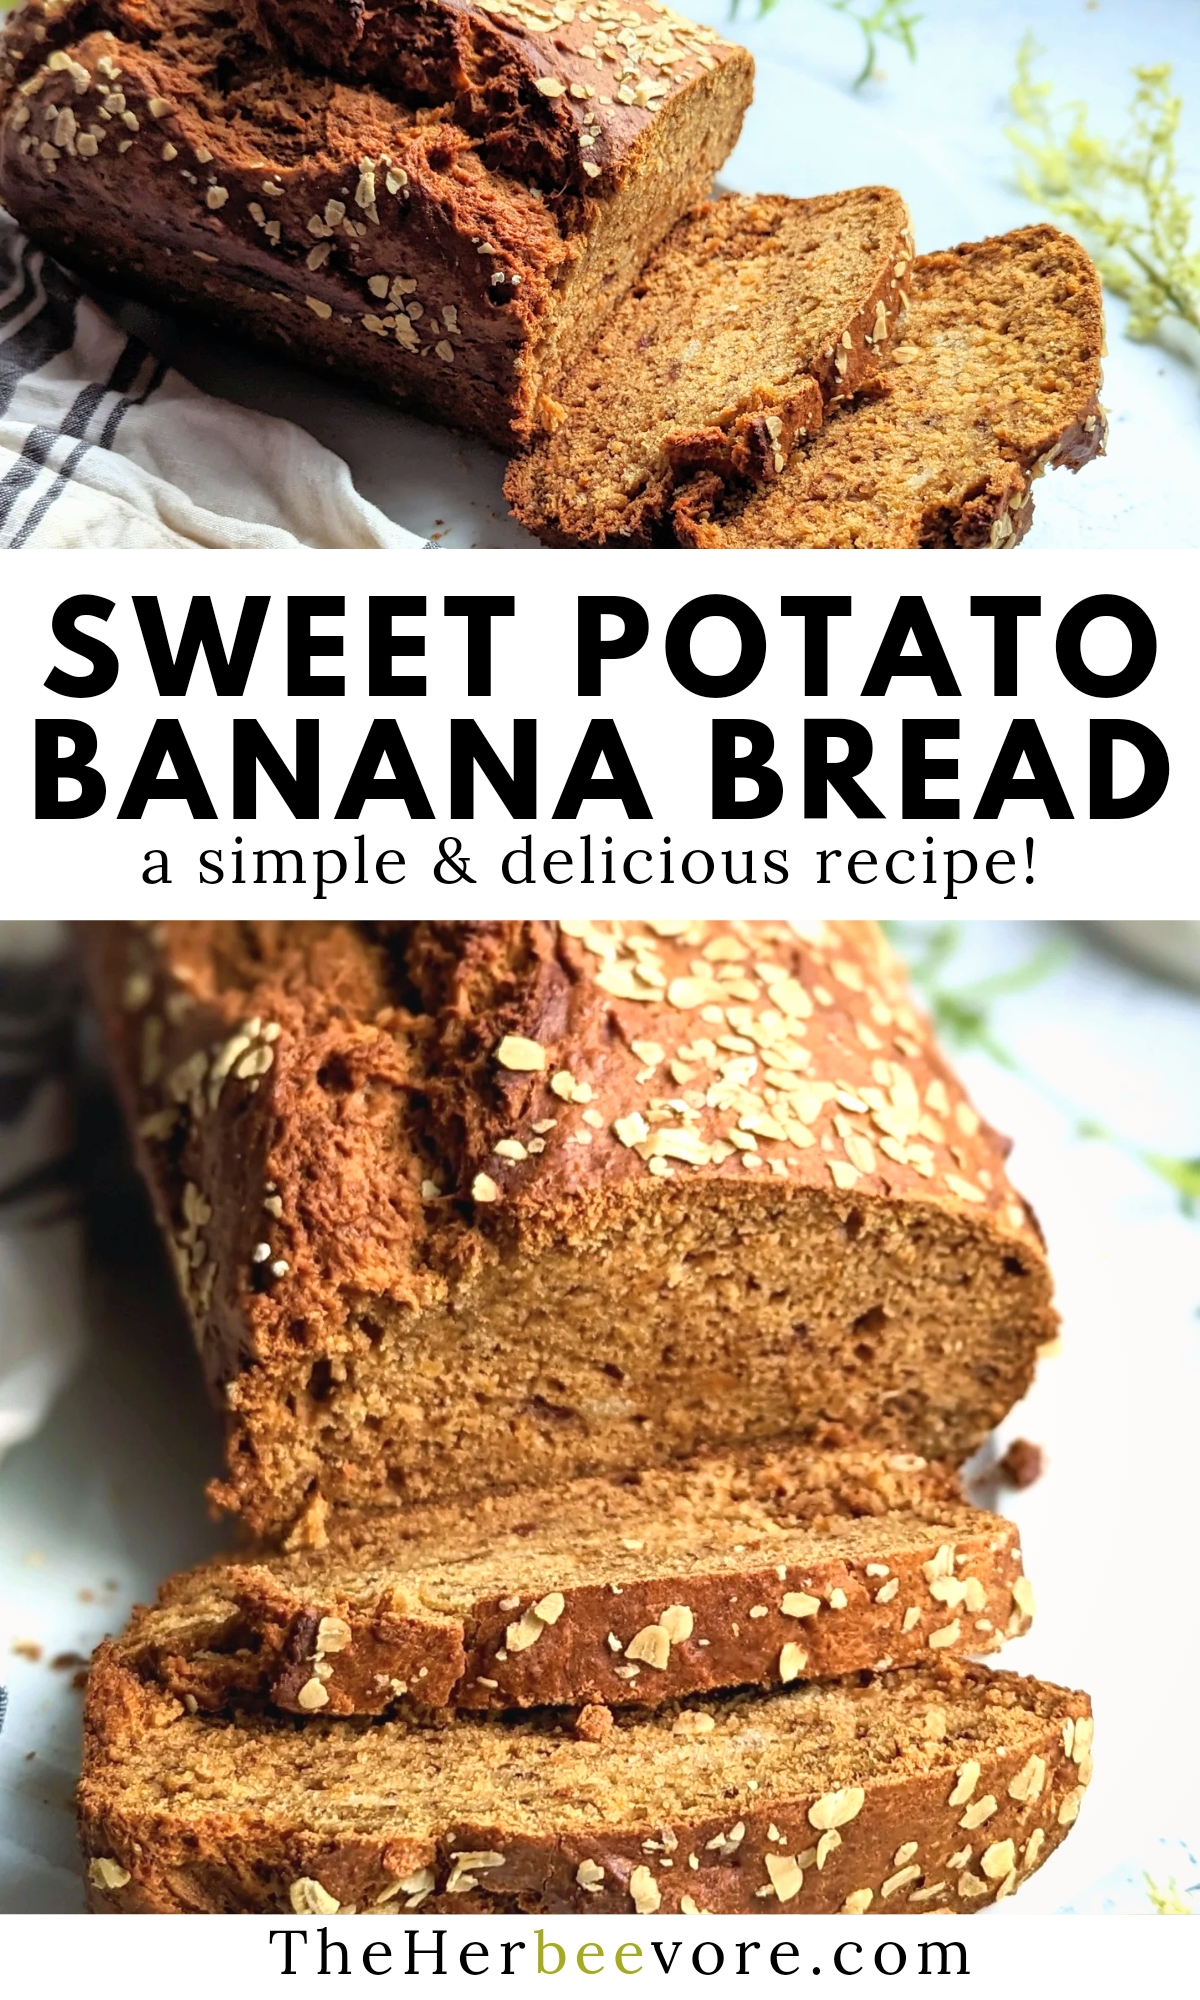 sweet potato banana bread recipe a simple and delicious sweet bread recipe with oats on top